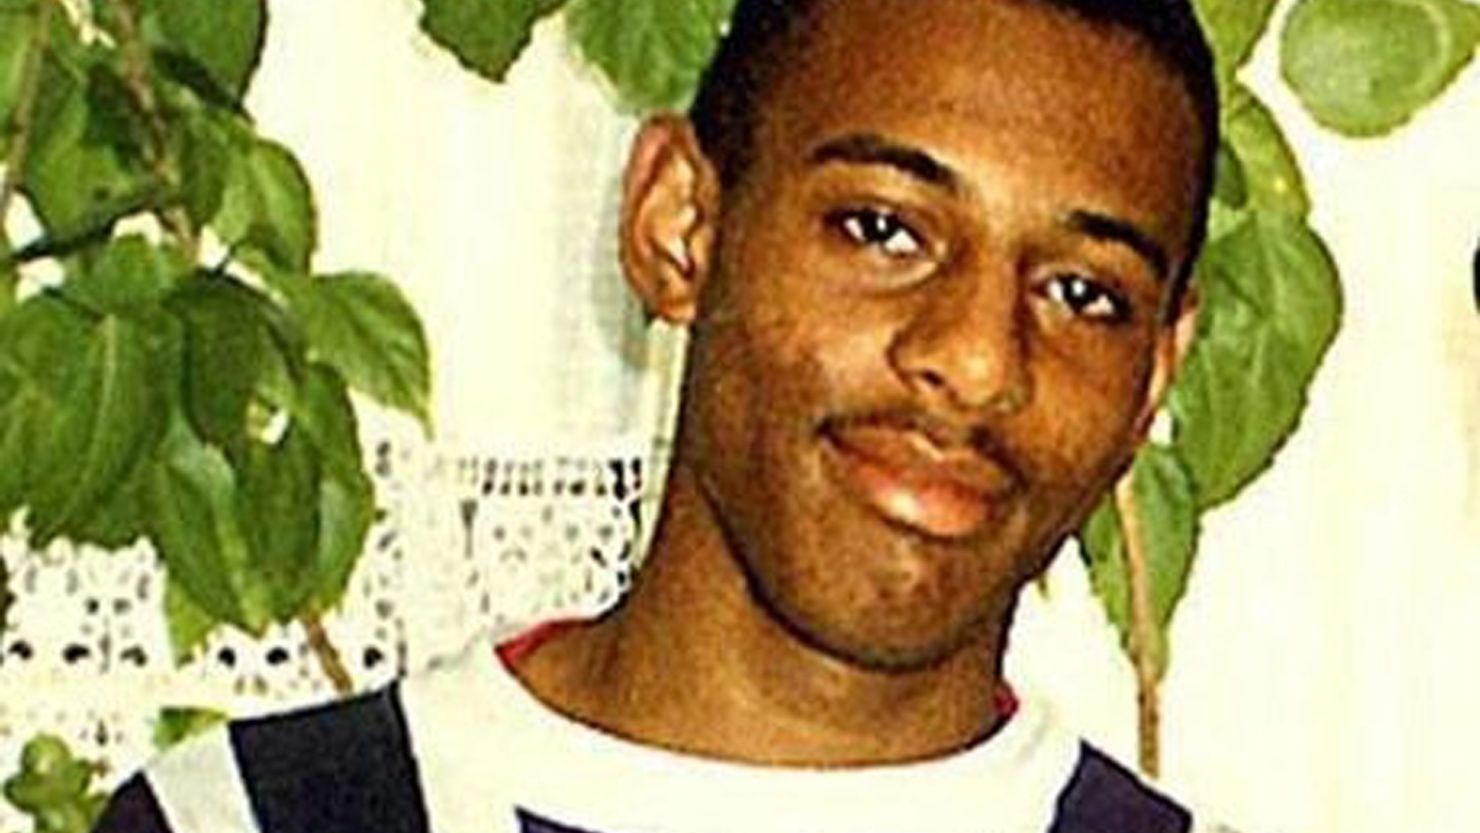 Stephen Lawrence, 18, was murdered by a gang of white youths as he waited at a bus stop in south east London in 1993. 